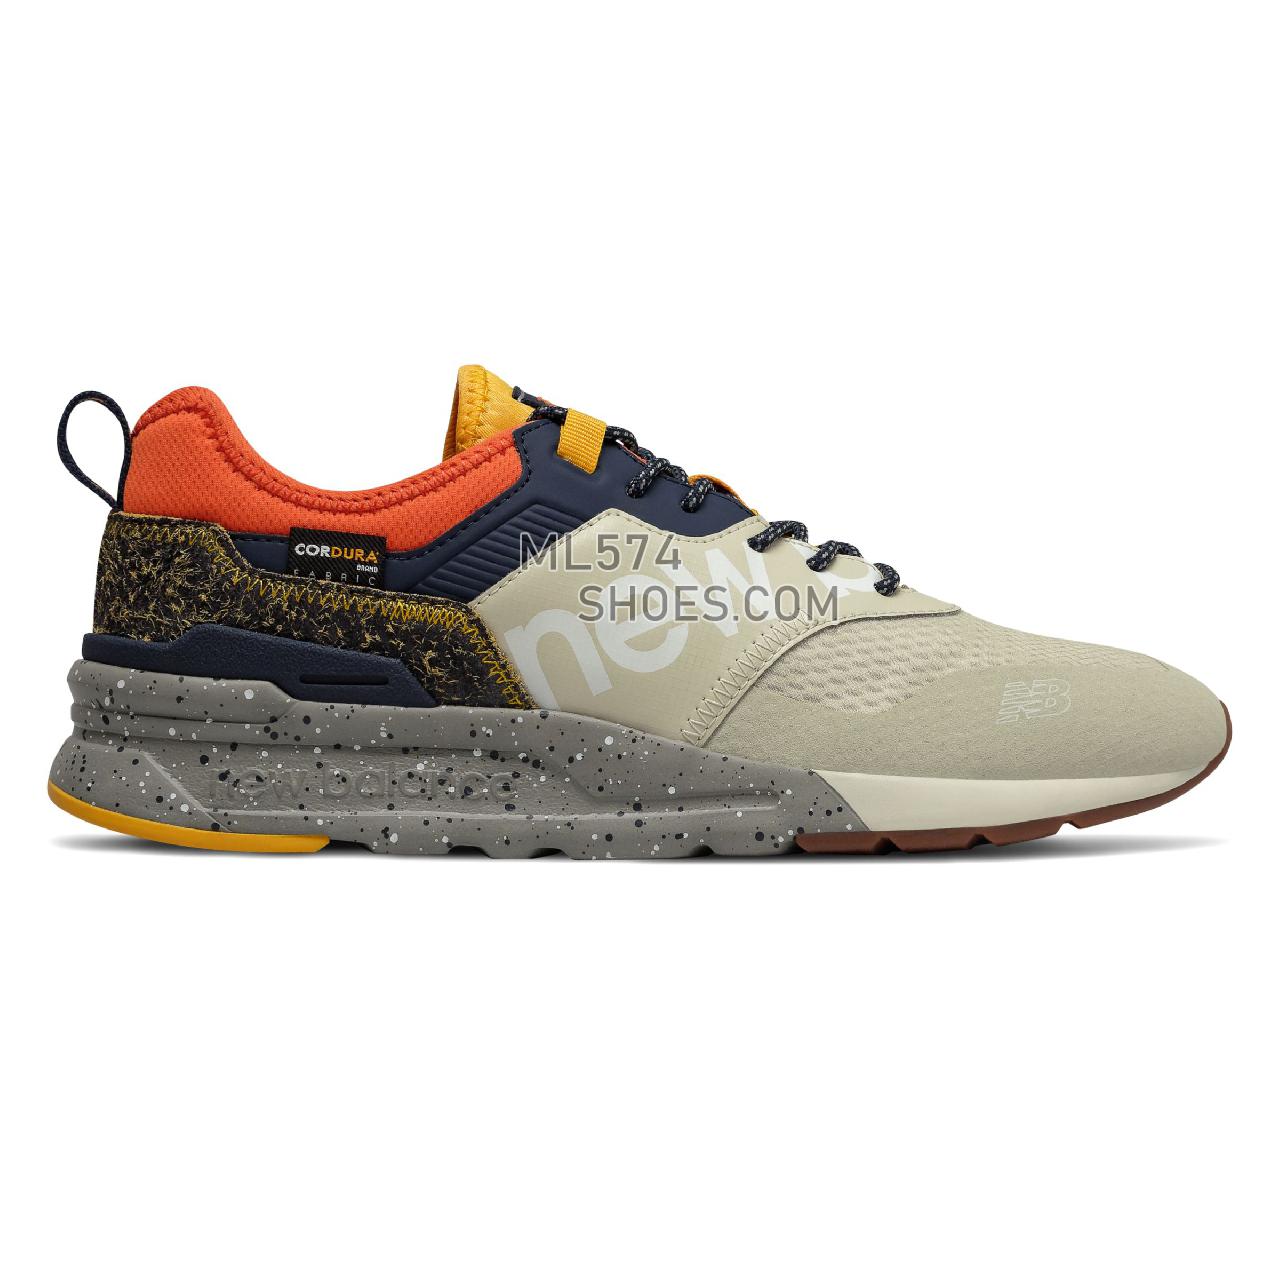 New Balance 997H Spring Hike Trail - Men's 997H Spring Hike Trail Classic - Oyster with Team Orange - CMT997HC